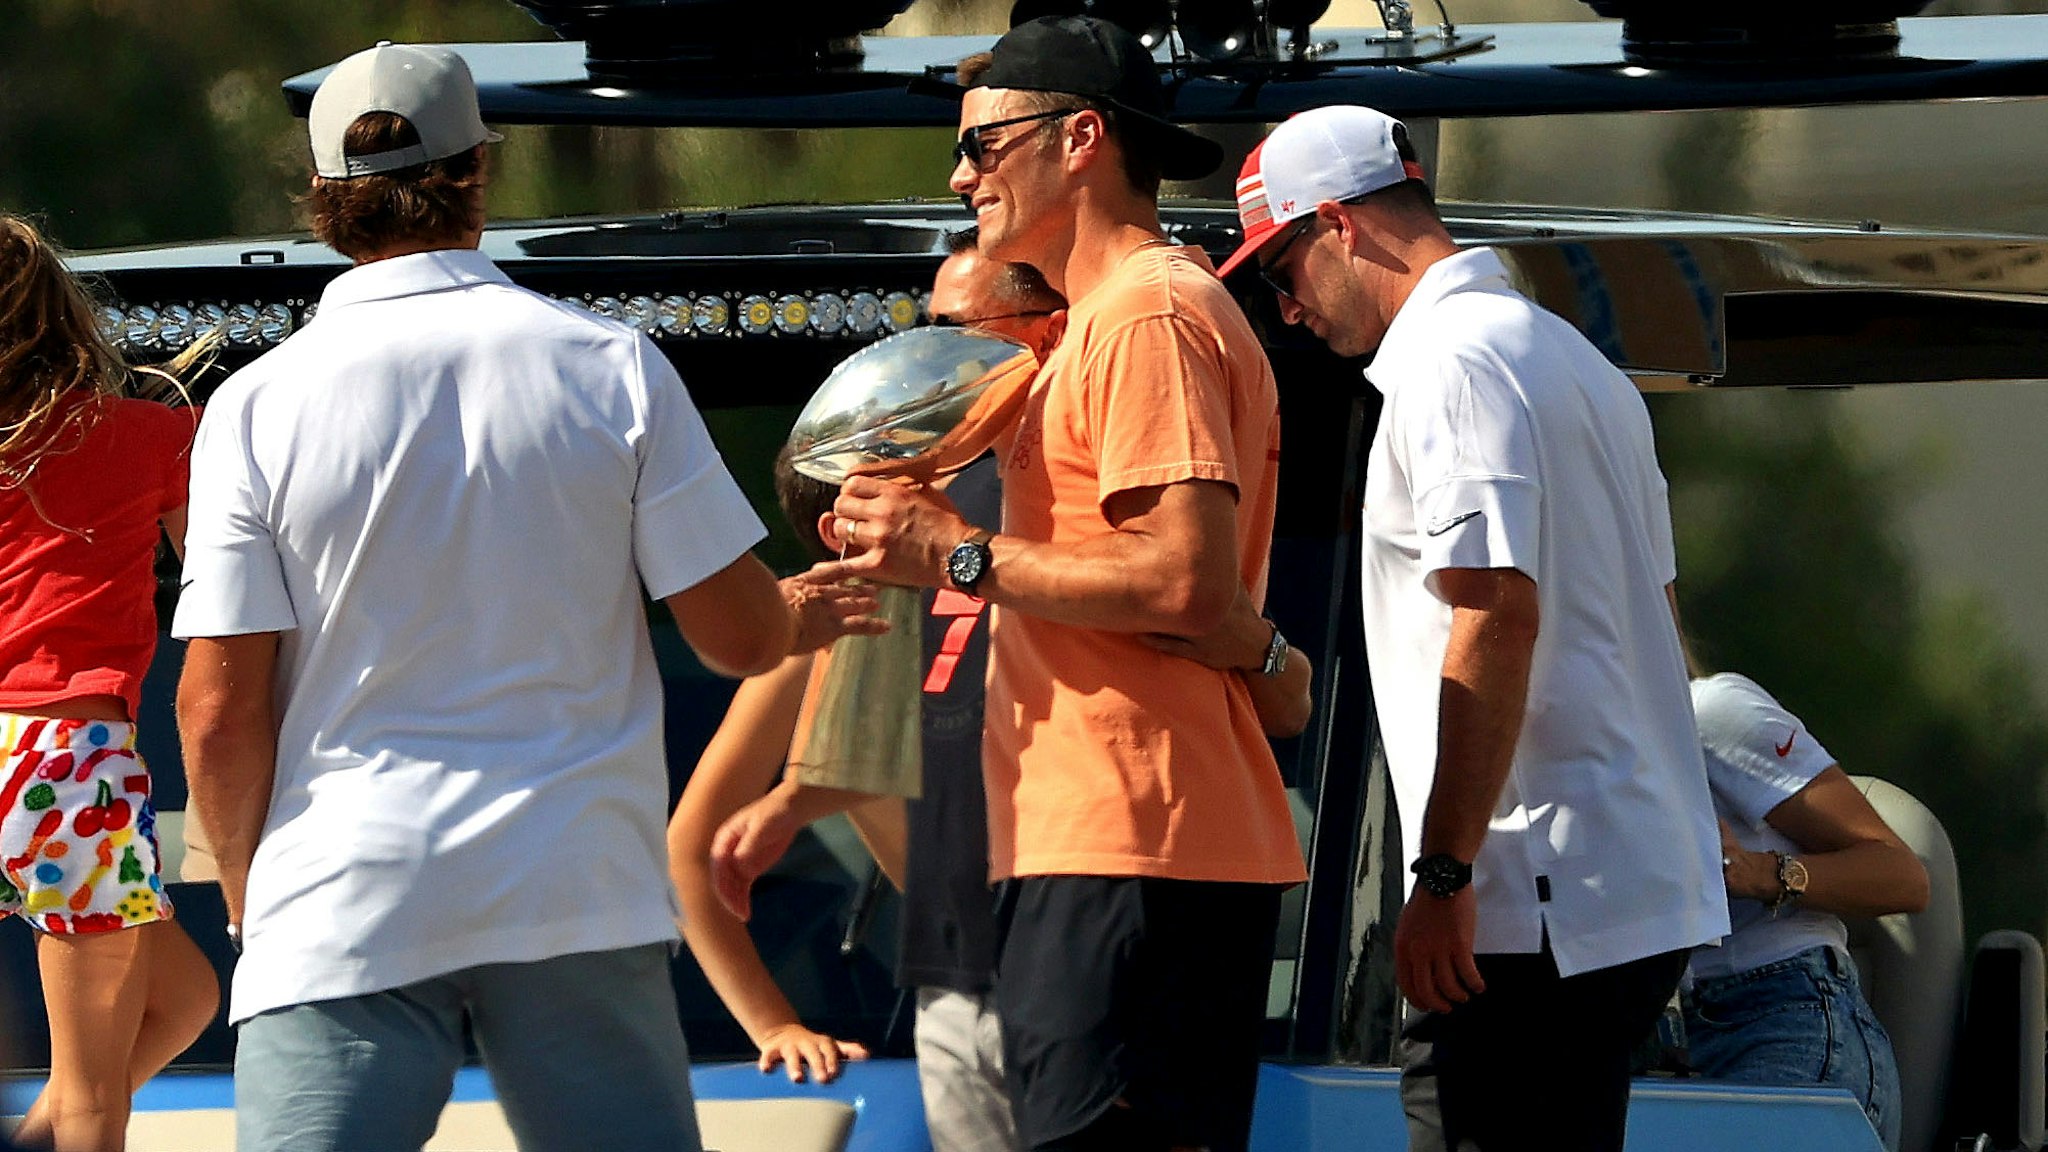 TAMPA, FLORIDA - FEBRUARY 10: Tom Brady #12 of the Tampa Bay Buccaneers celebrates their Super Bowl LV victory with the Vince Lombardi trophy during a boat parade through the city on February 10, 2021 in Tampa, Florida.